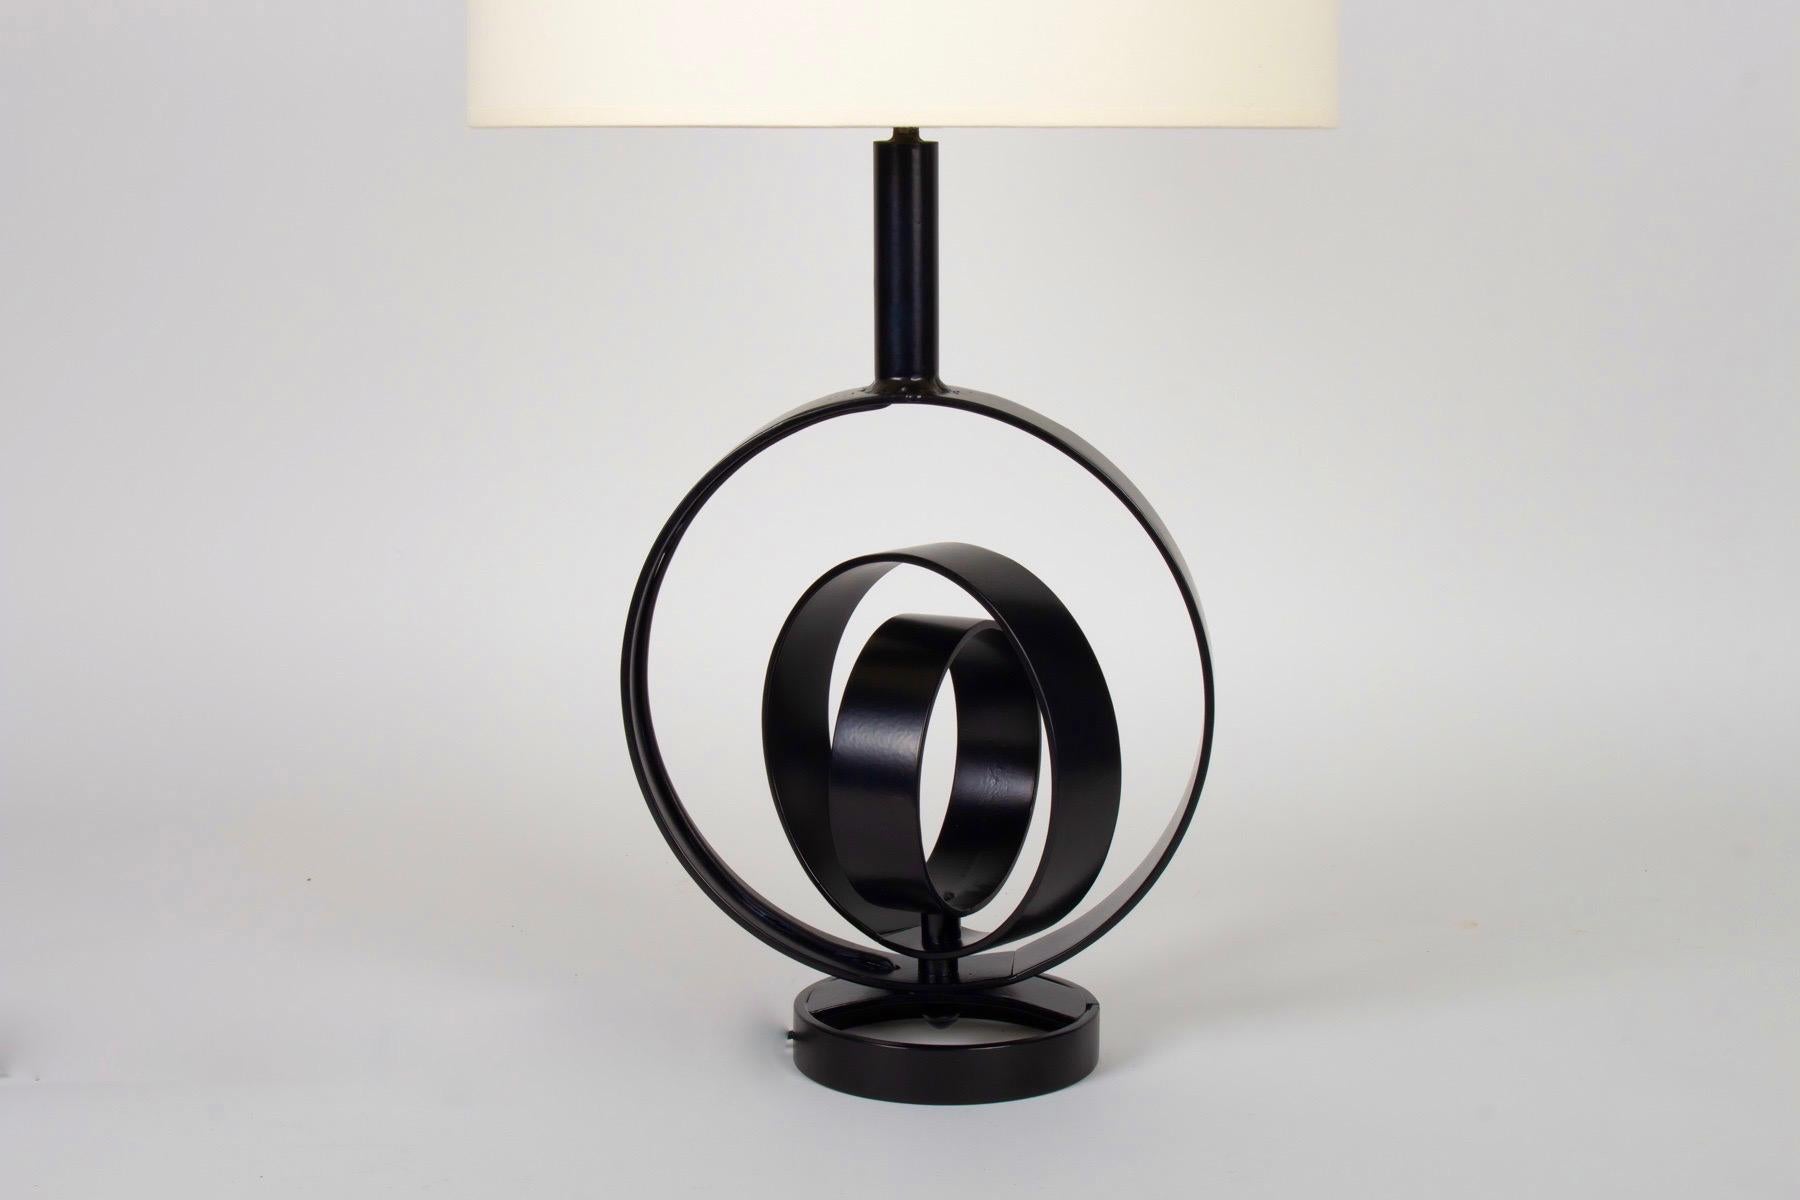 Large black wrought iron lamp inspired by the terrestrial globe from 1970
Beautiful work of ironwork done by hand. Unique piece
Composed of a large circle in black flat wrought iron in which 2 other circles of different sizes and positioned with